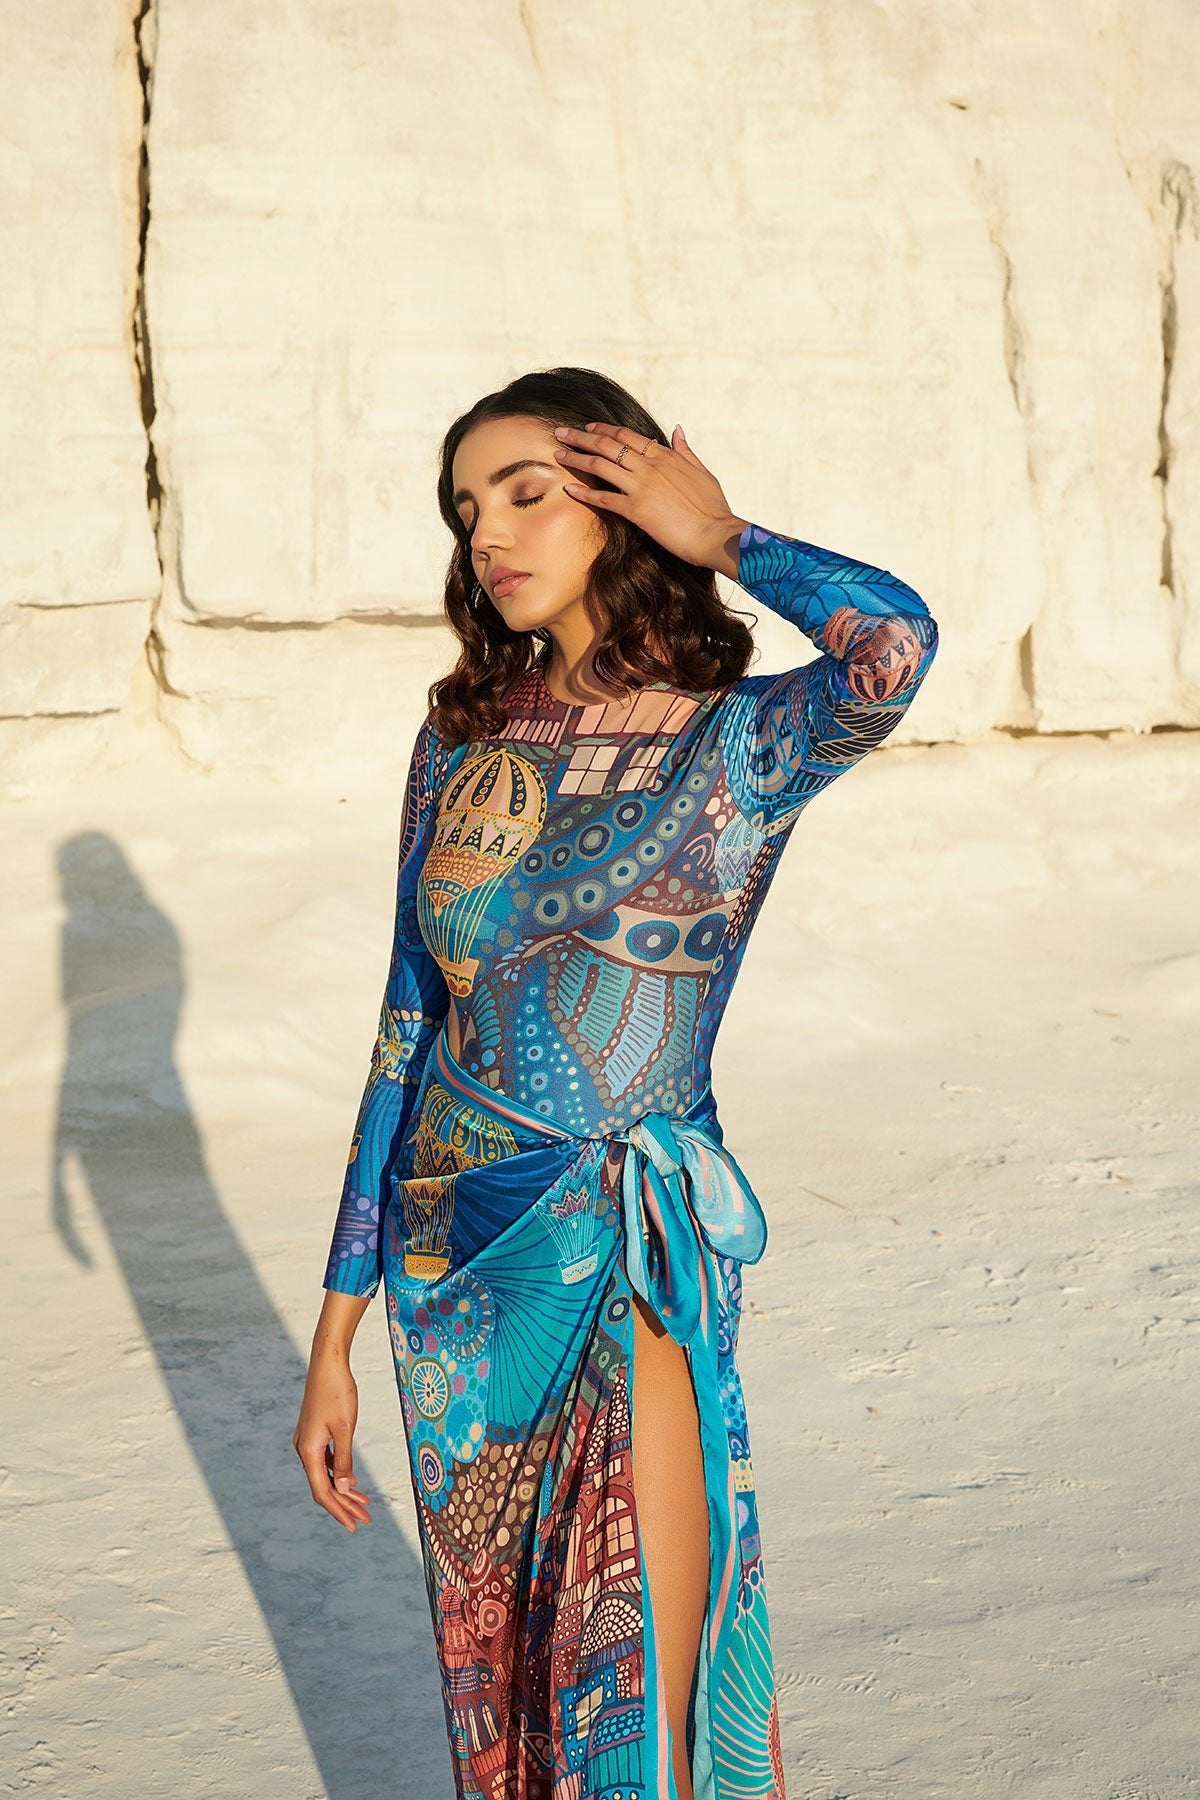 Long-Sleeved Halo Swimsuit paired with Beach Bum Sarong in Cappadocia